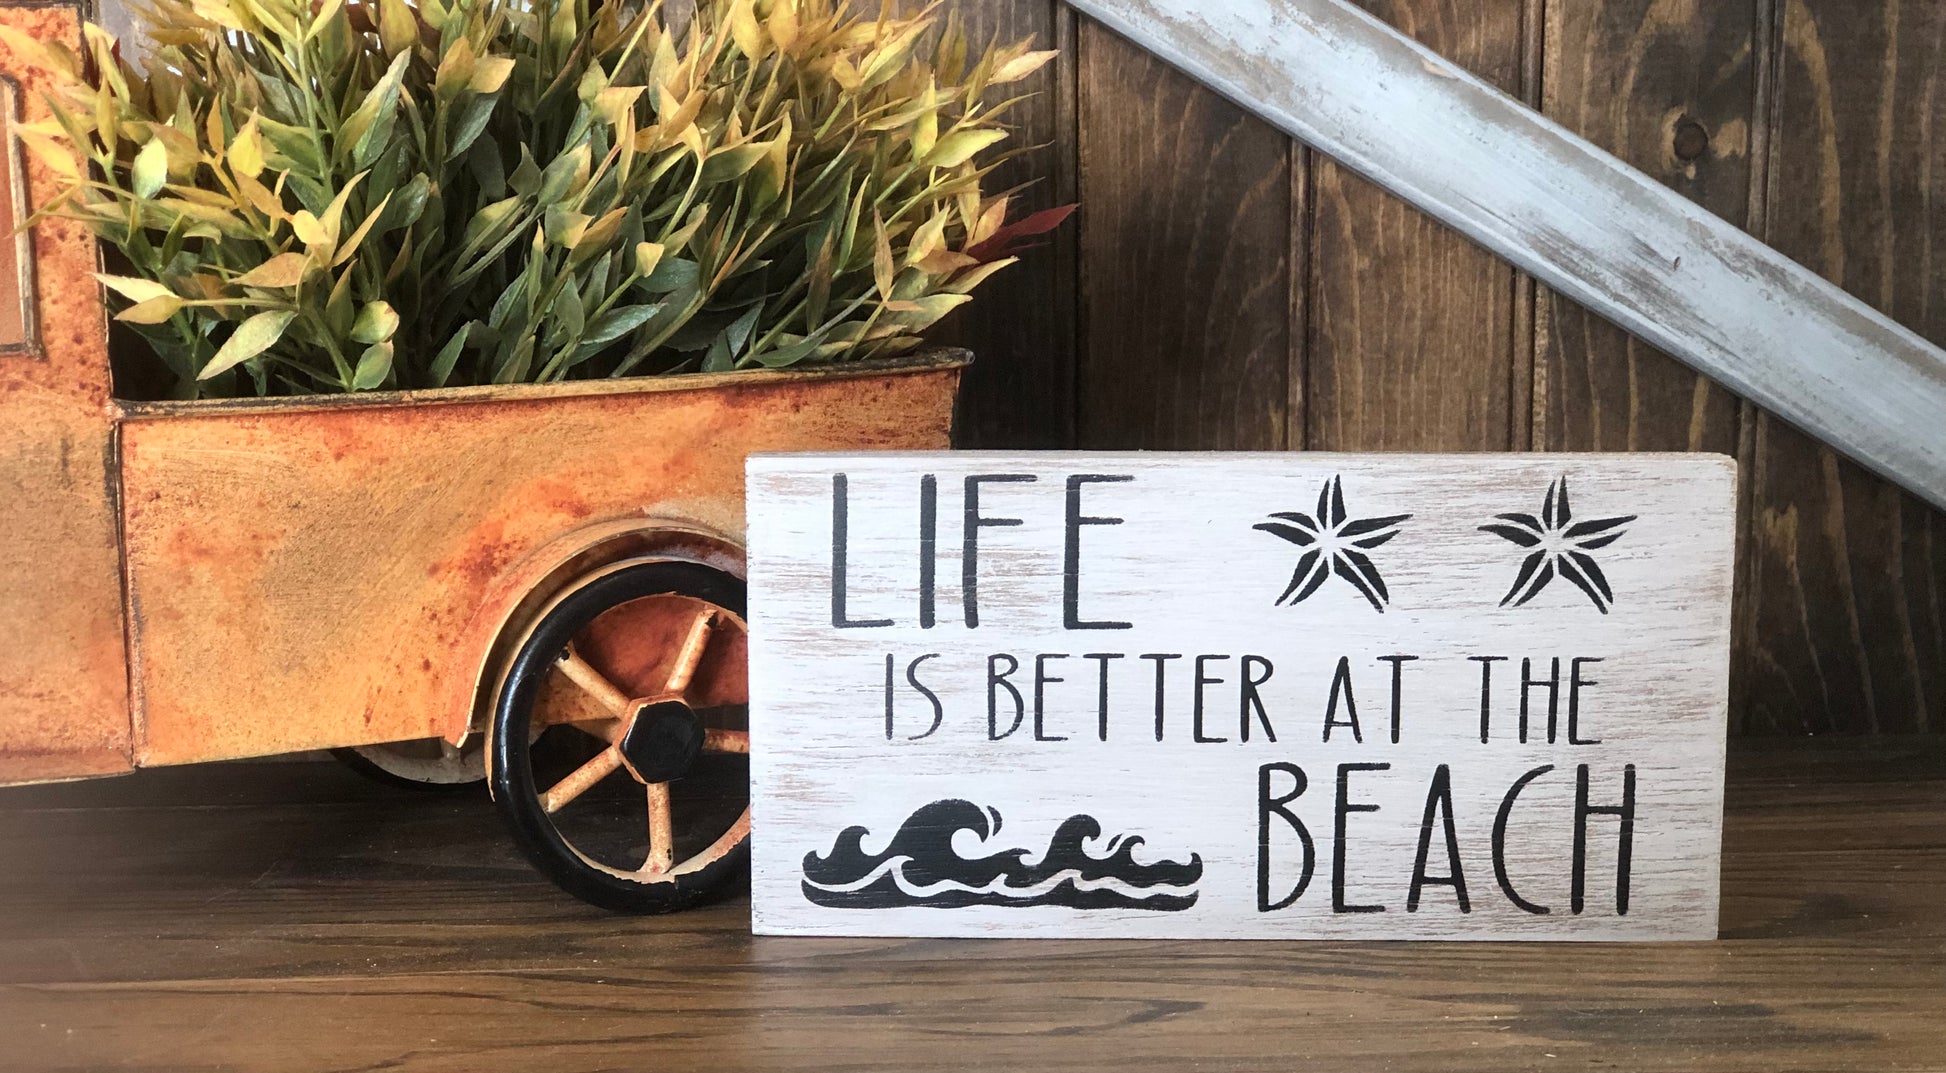 "Better at the beach" wood sign